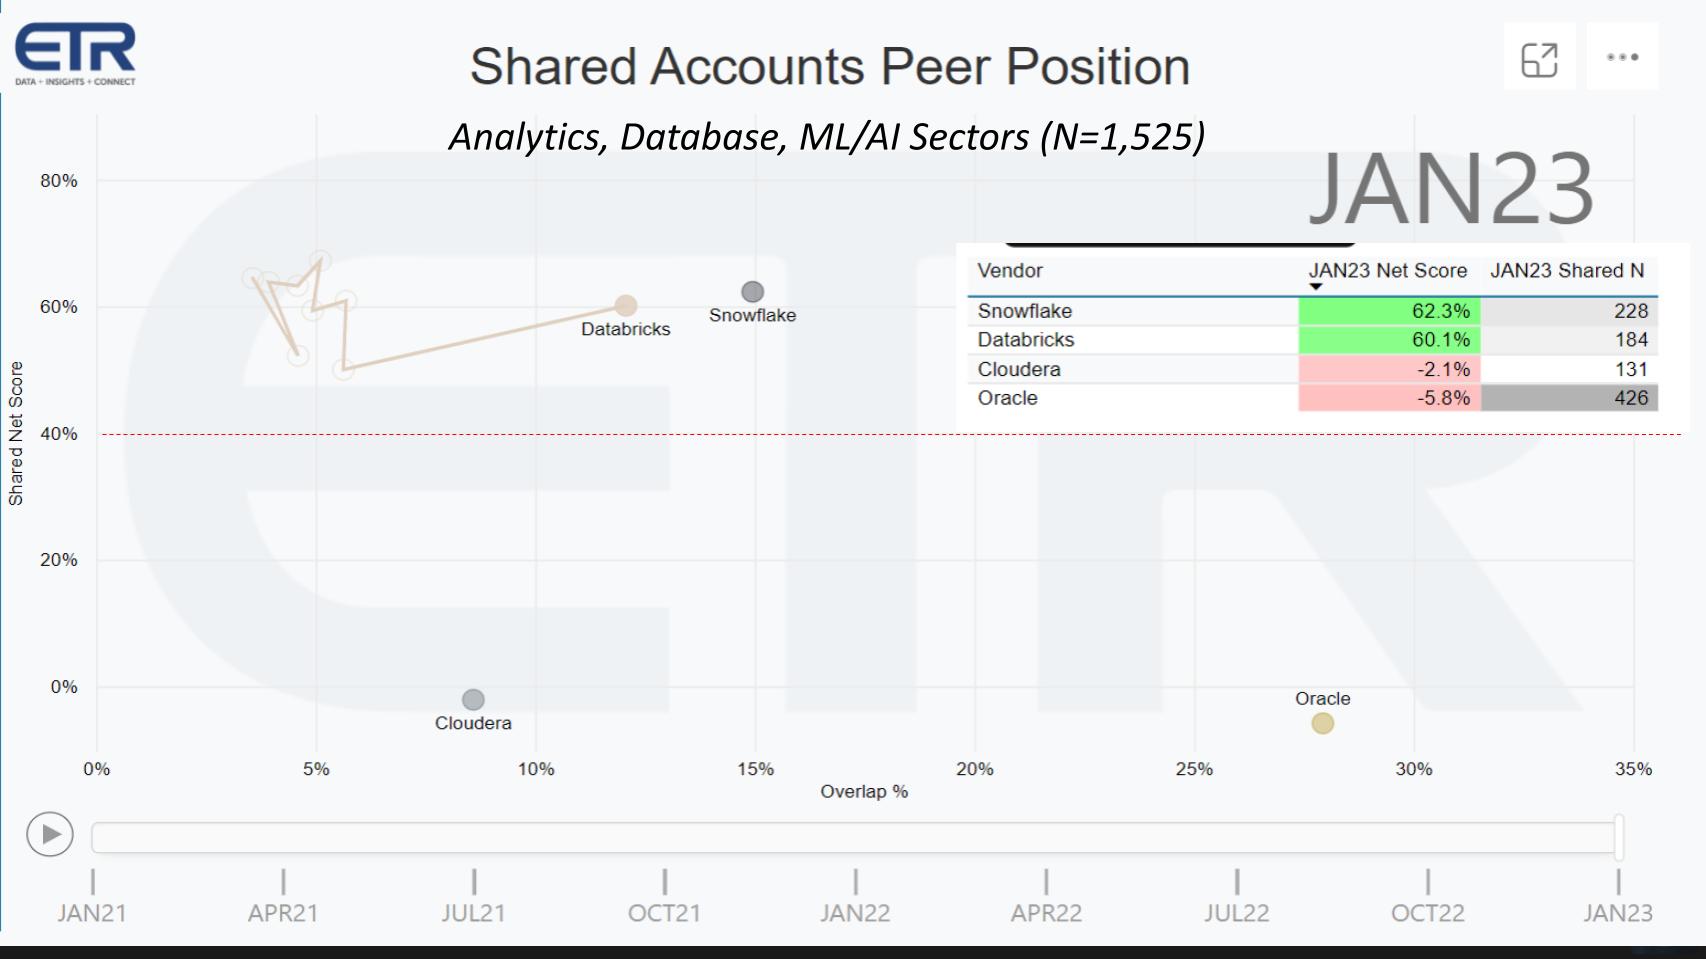 Databricks, Snowflake, Cloudera, and Oracle graph from ETR showing shared accounts peer position in the analytics, database, and ML/AI sectors